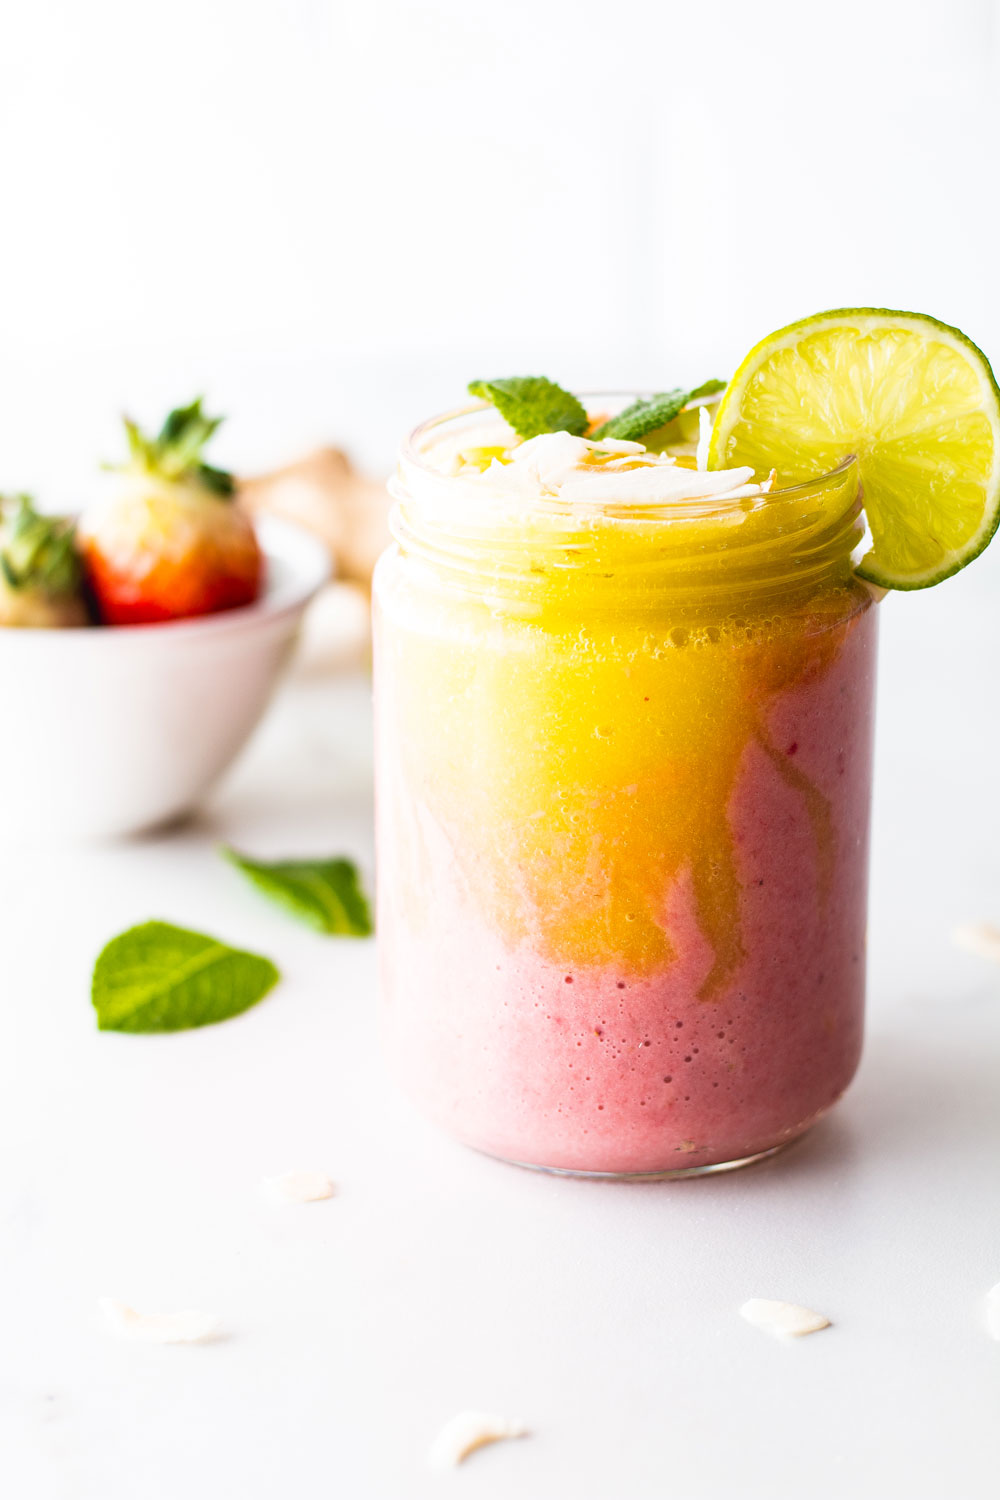 Seasonal allergies, asthma flare-ups, and colds are quite common this time of year, and this mango & strawberry spring breakfast smoothie is the best way to take extra precaution against those ailments. https://www.spotebi.com/recipes/mango-strawberry-spring-breakfast-smoothie/